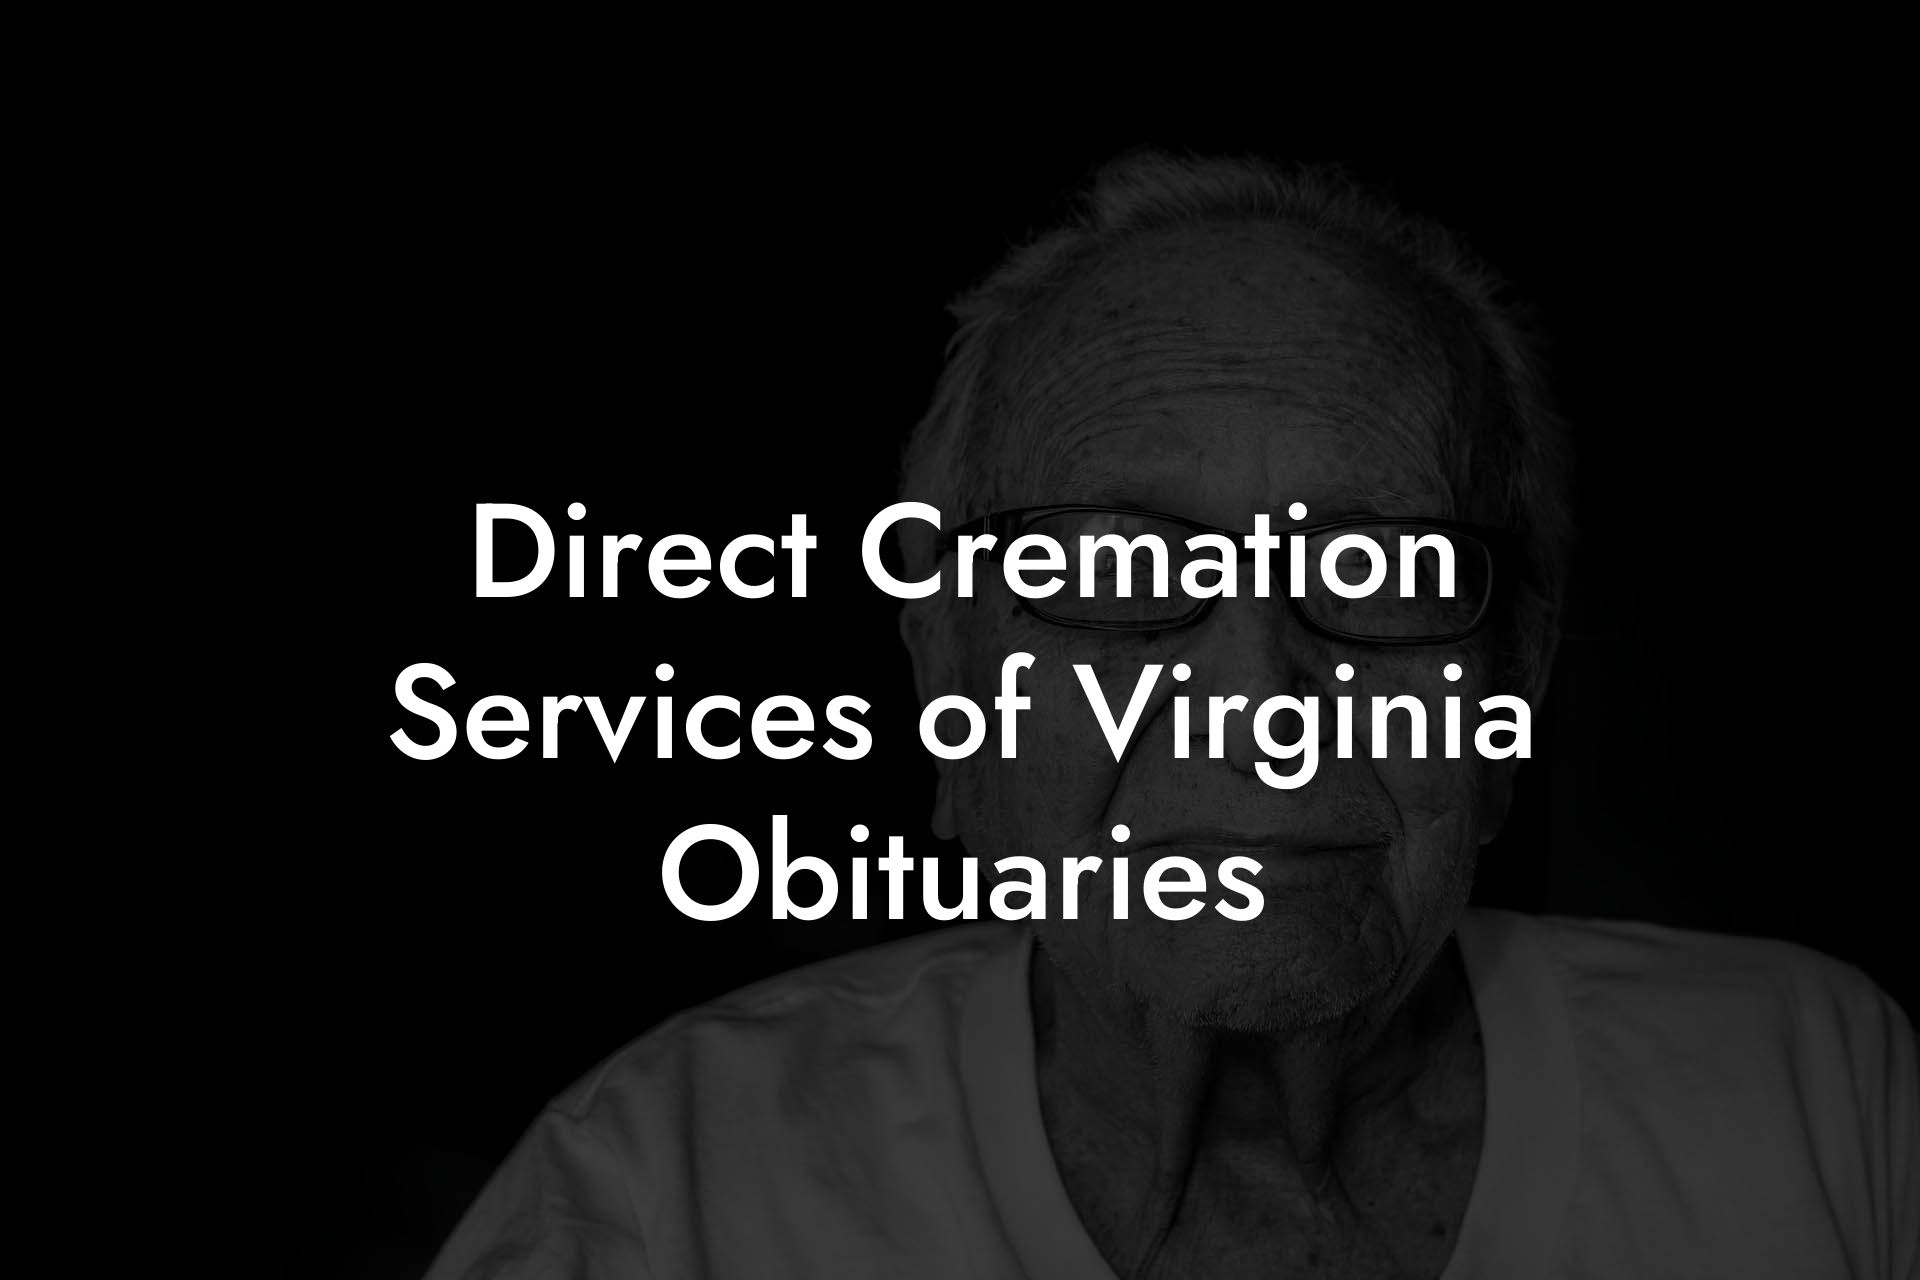 Direct Cremation Services of Virginia Obituaries